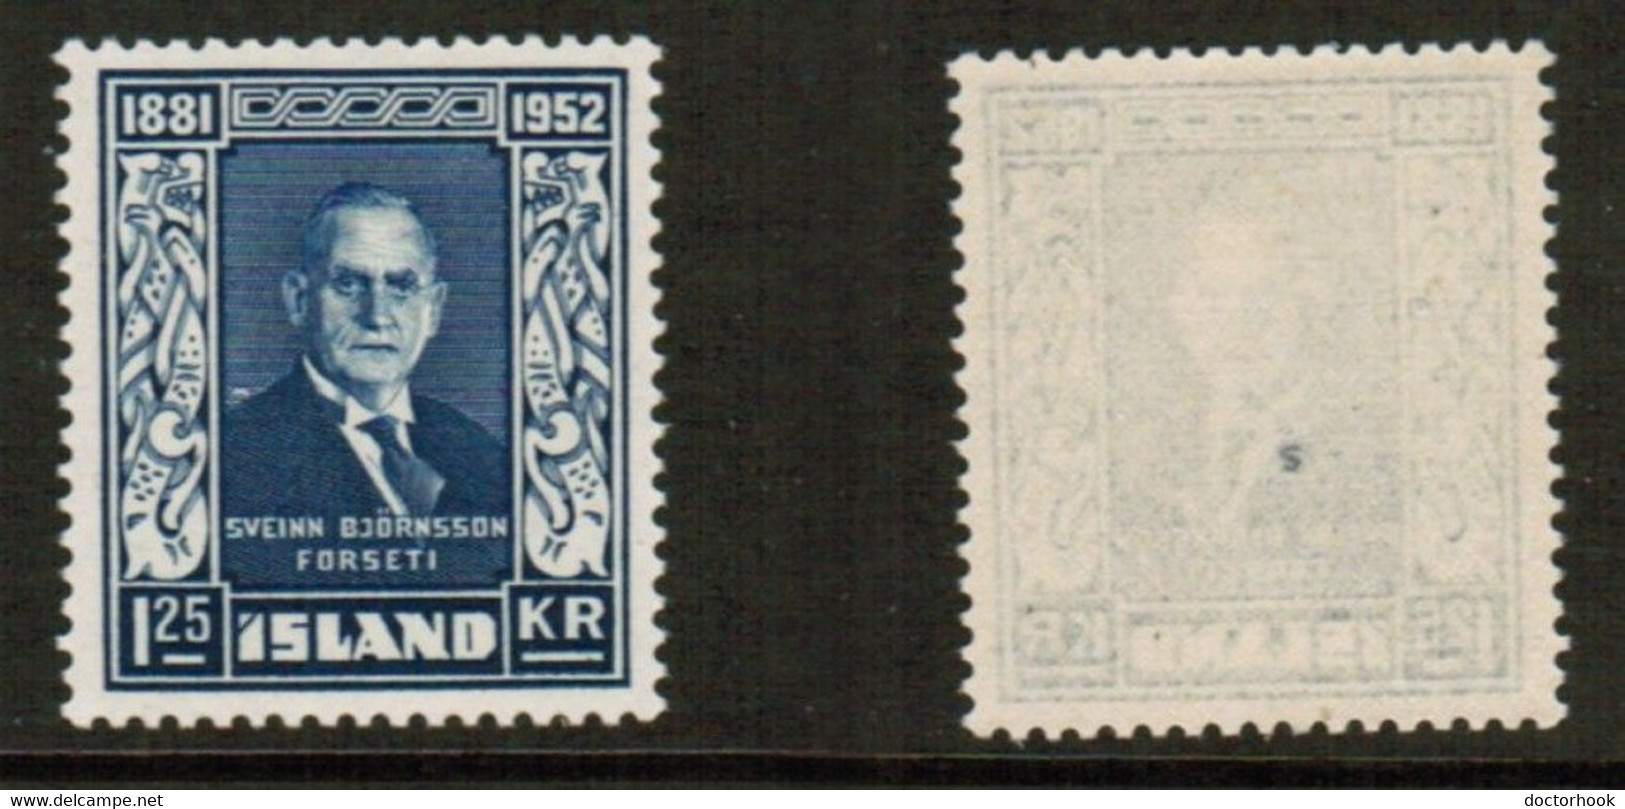 ICELAND   Scott # 274* MINT LH (CONDITION AS PER SCAN) (Stamp Scan # 861-2) - Nuevos